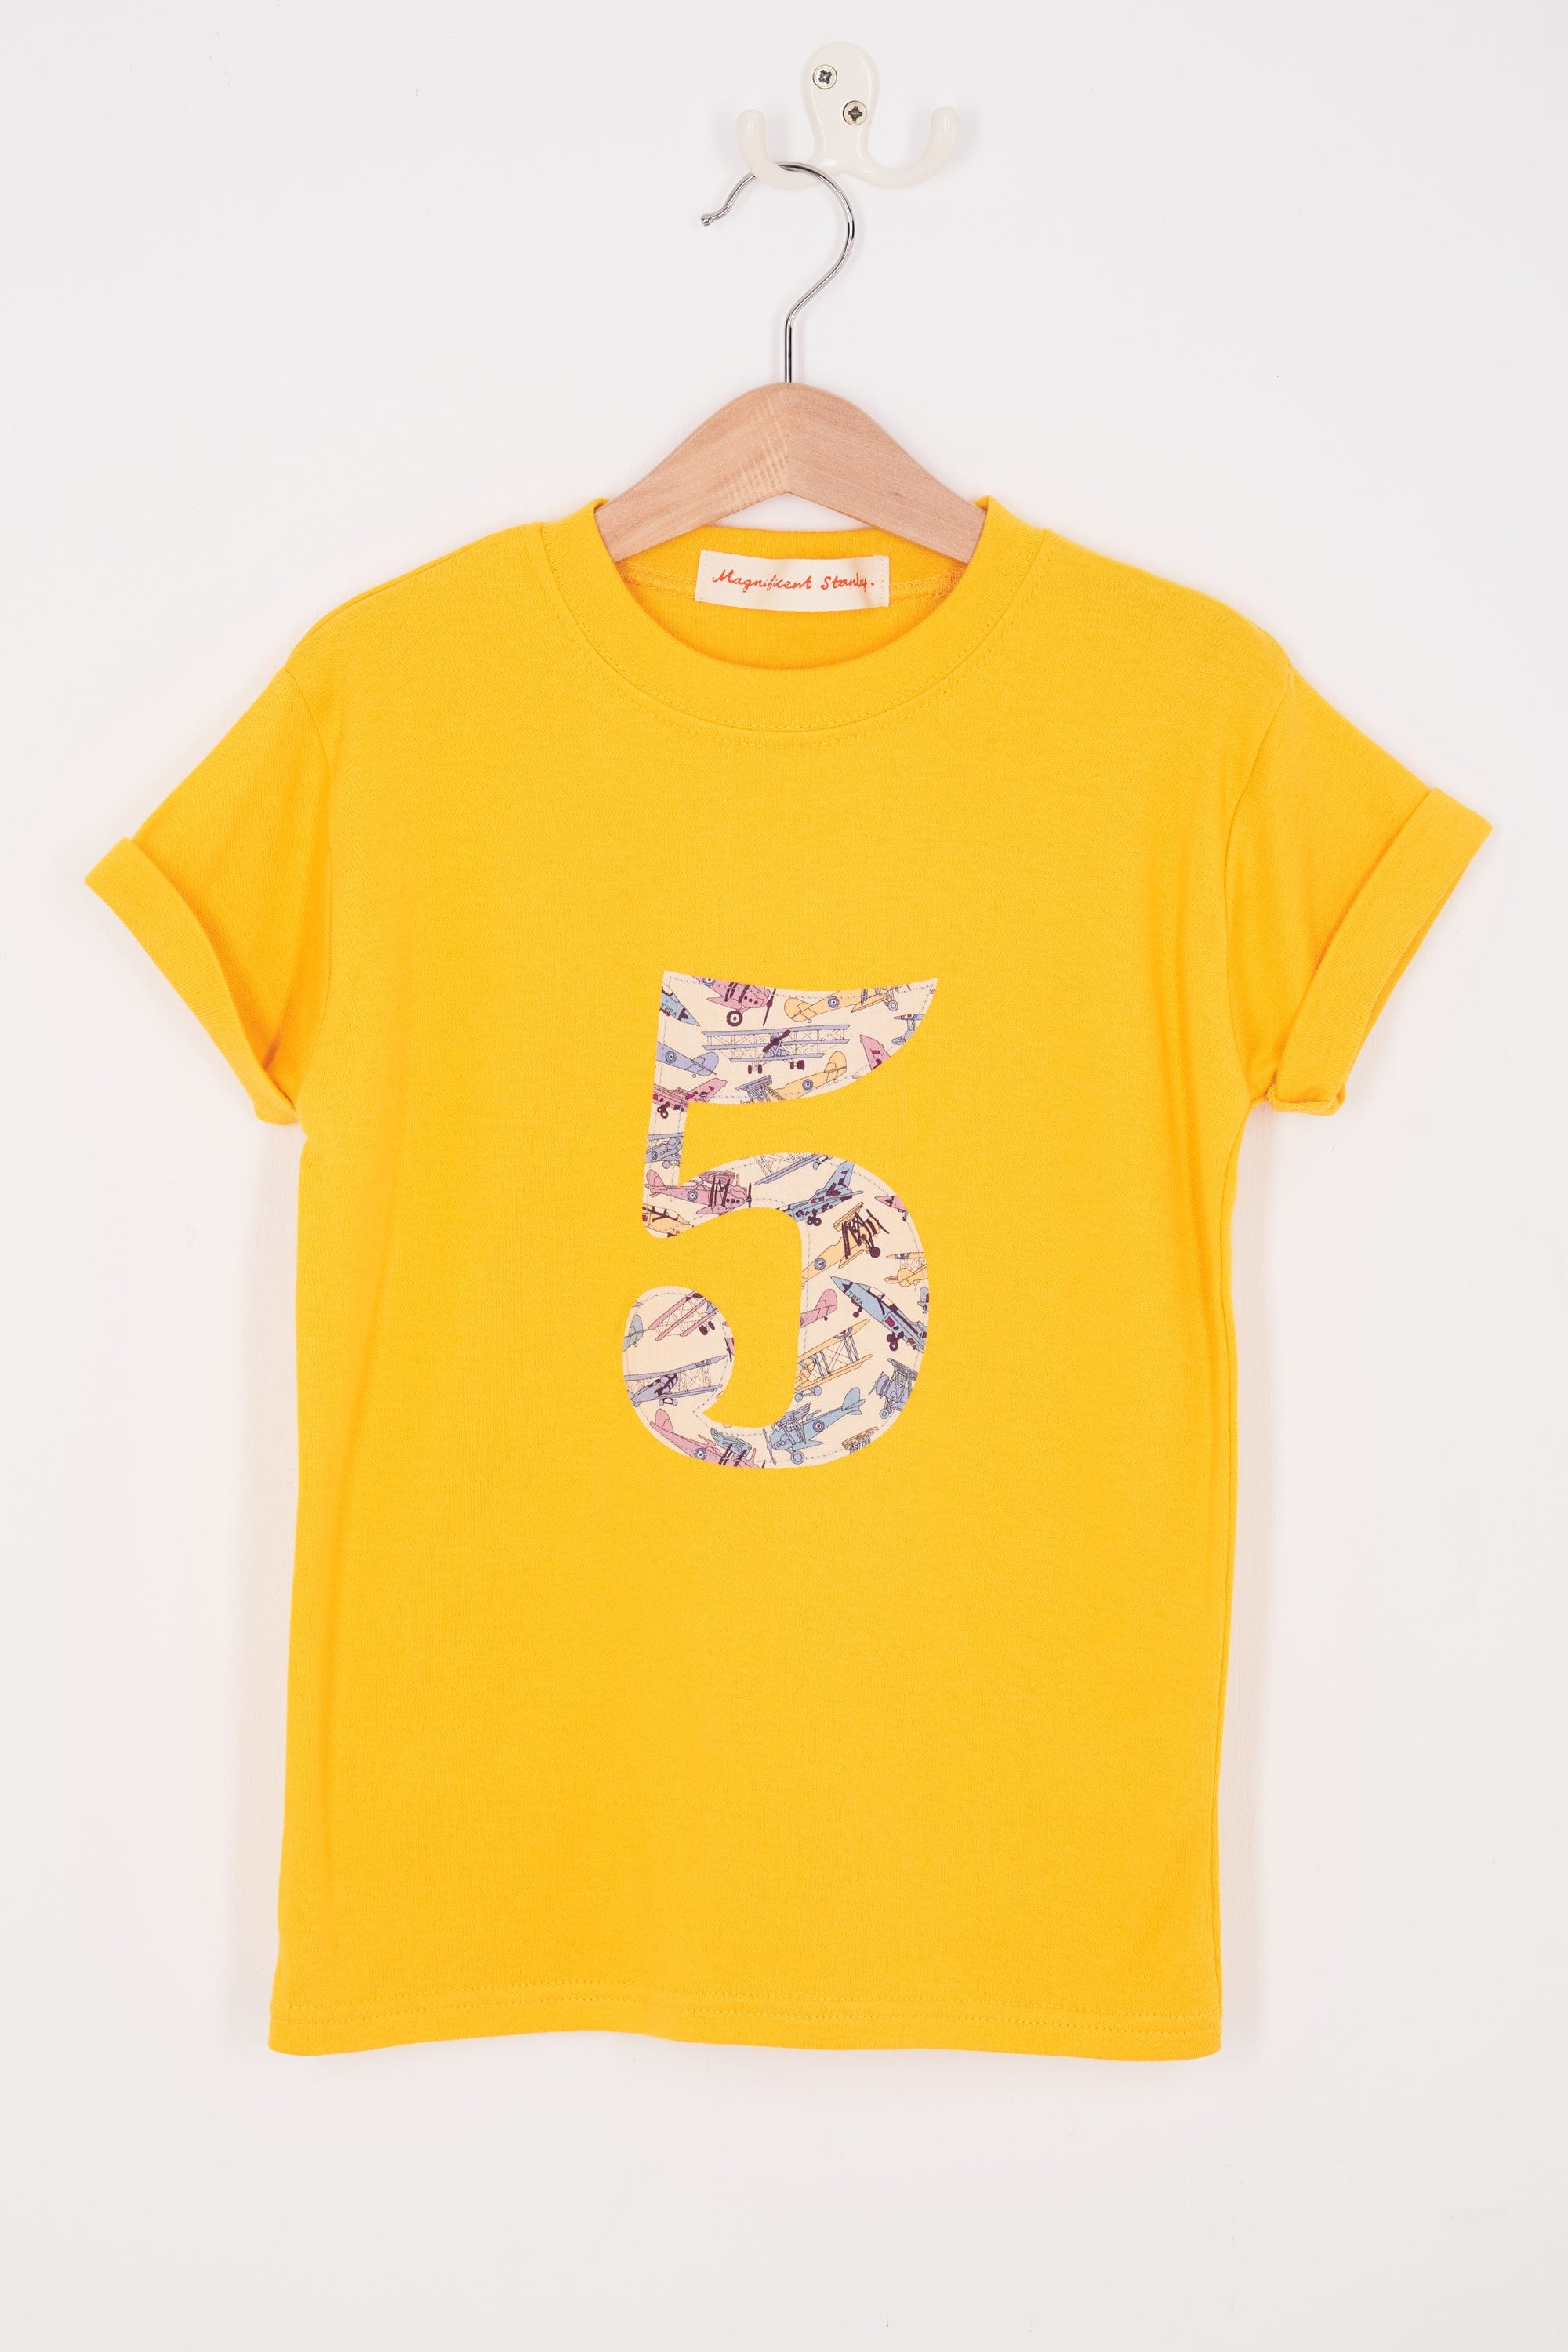 Magnificent Stanley Tee Number Yellow T-Shirt in Tom's Jet Liberty Print